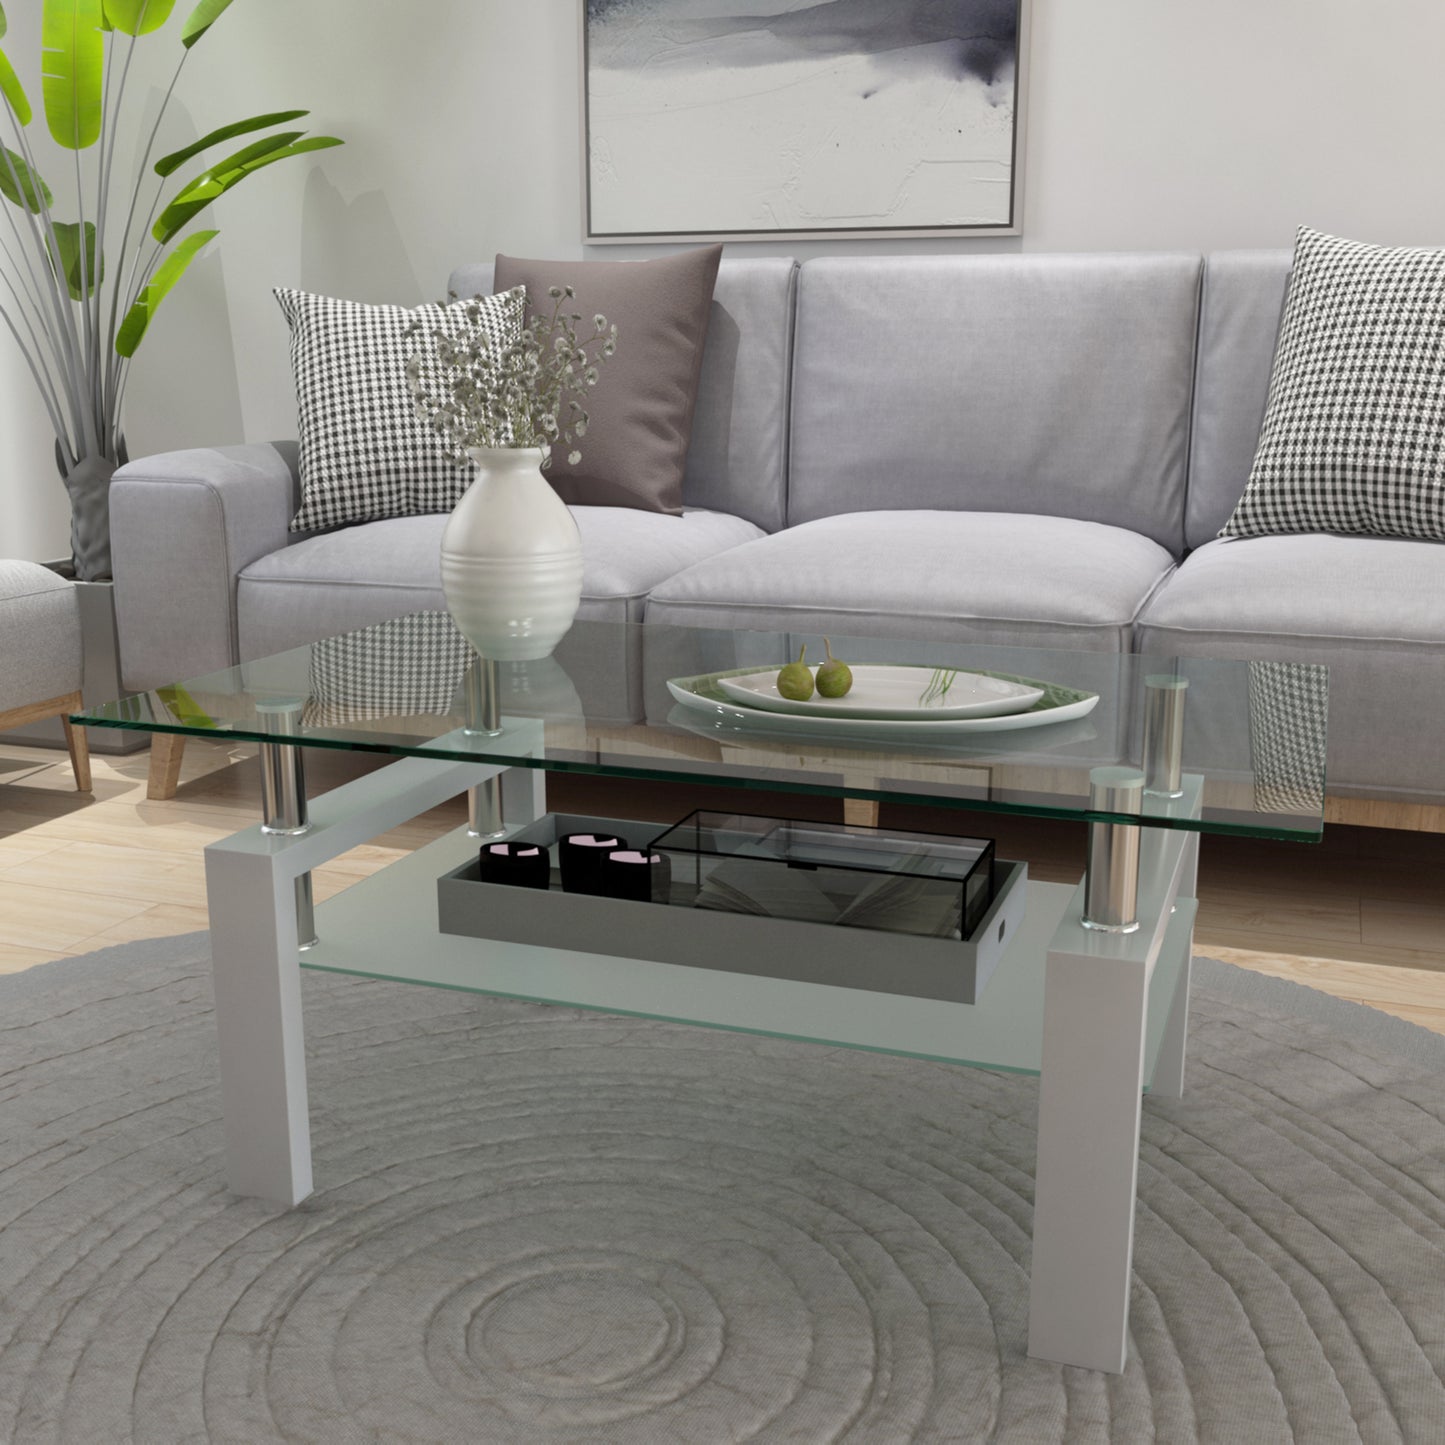 Stantlee Coffee Table (white)